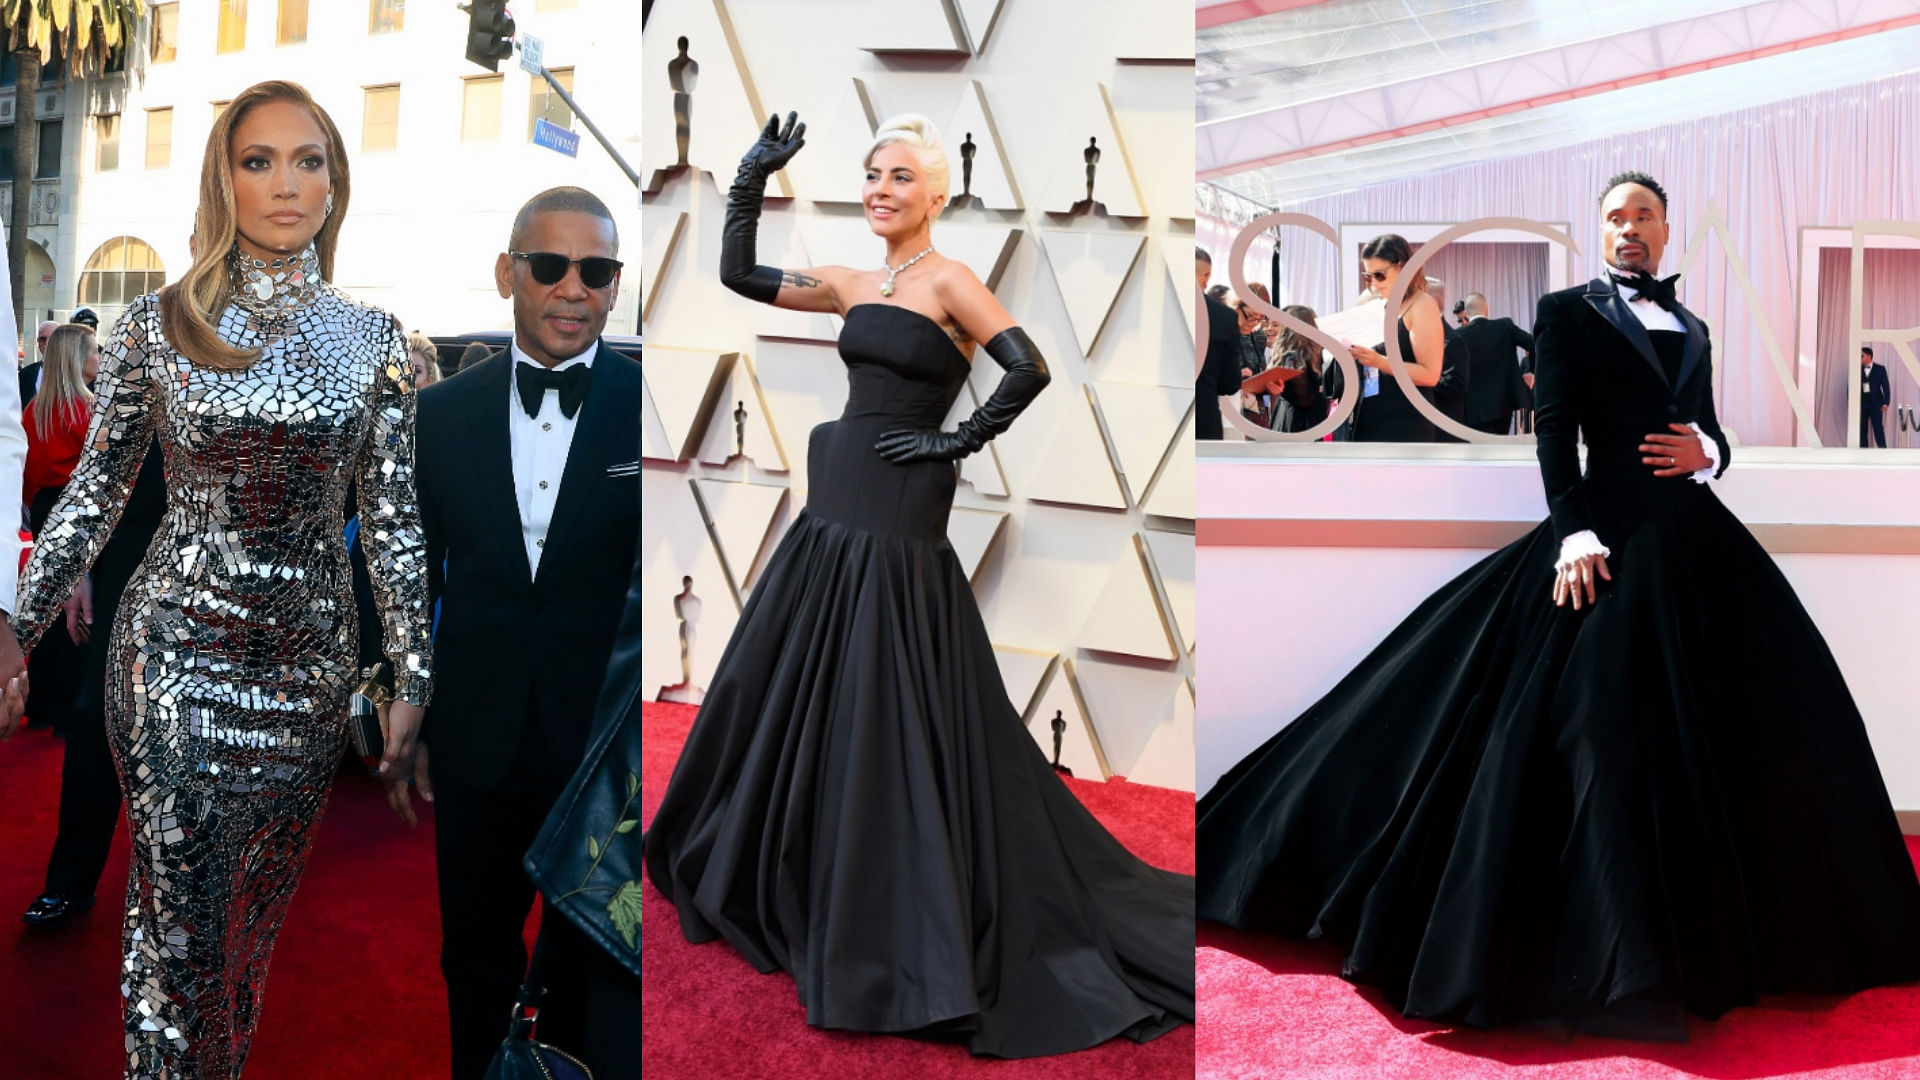 Jennifer Lopez, Lady Gaga and Billy Porter on the red carpet at the Academy Awards 2019.